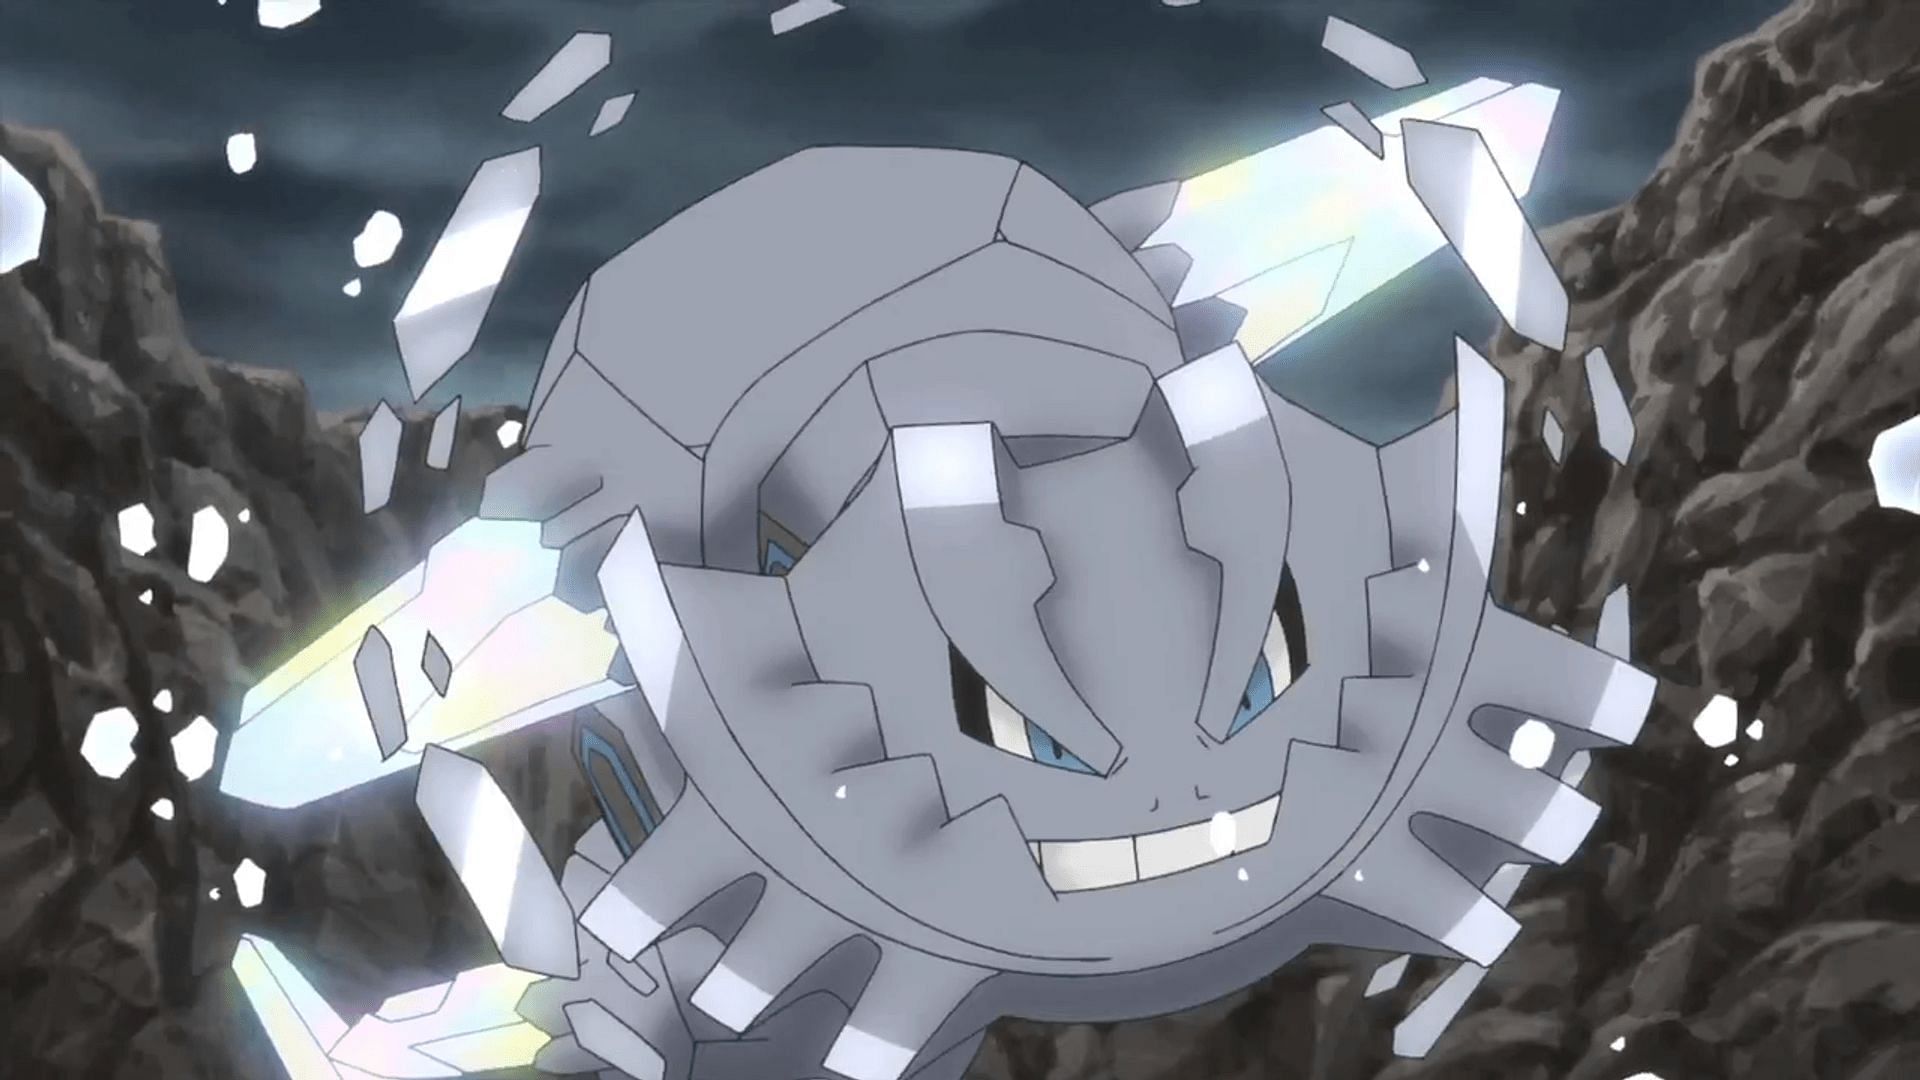 Mega Steelix made an appearance facing off against Mega Glalie in the animated trailer for Pokemon Omega Ruby and Alpha Sapphire (Image via The Pokemon Company)